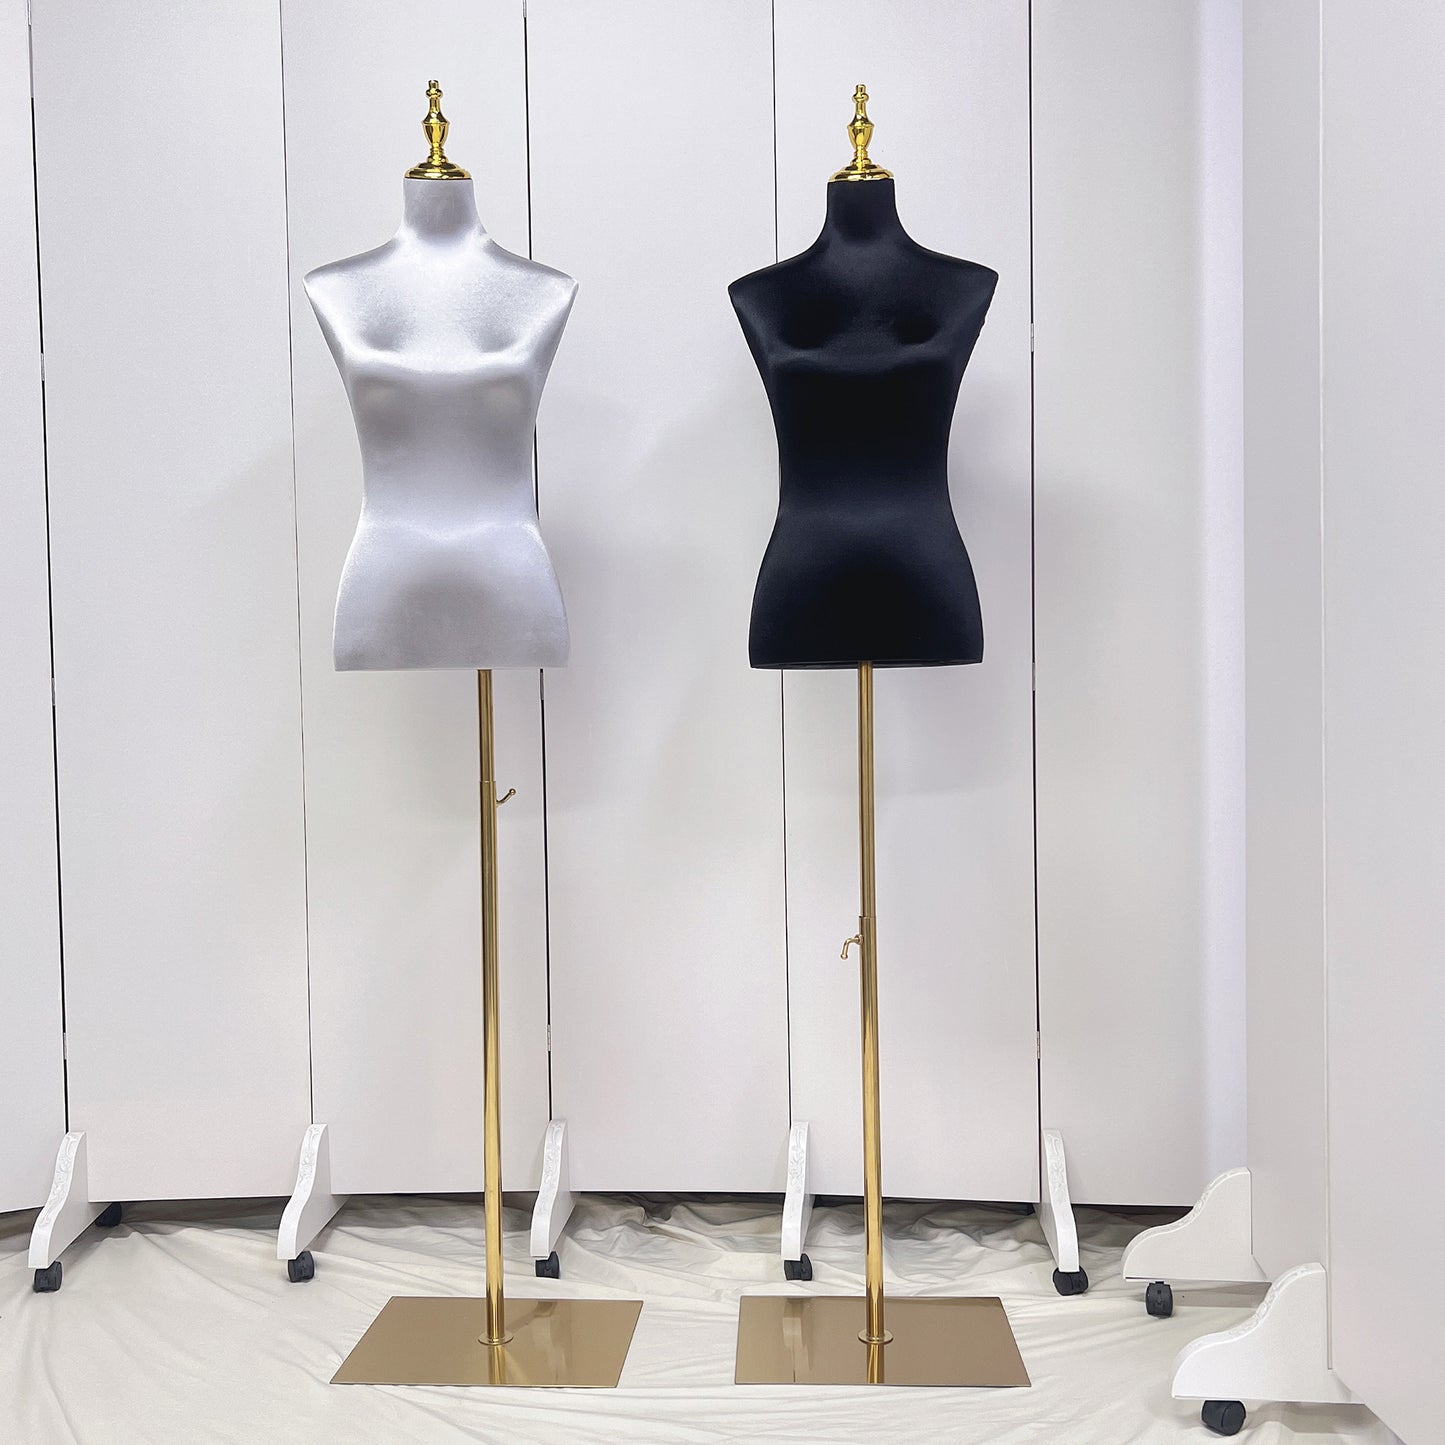 Jelimate Cheap Colorful Headless Satin Mannequin Upper Body,Clothing Mannequin Torso Female Dress Form,Fashion Showroom Shop Window Display Model Props